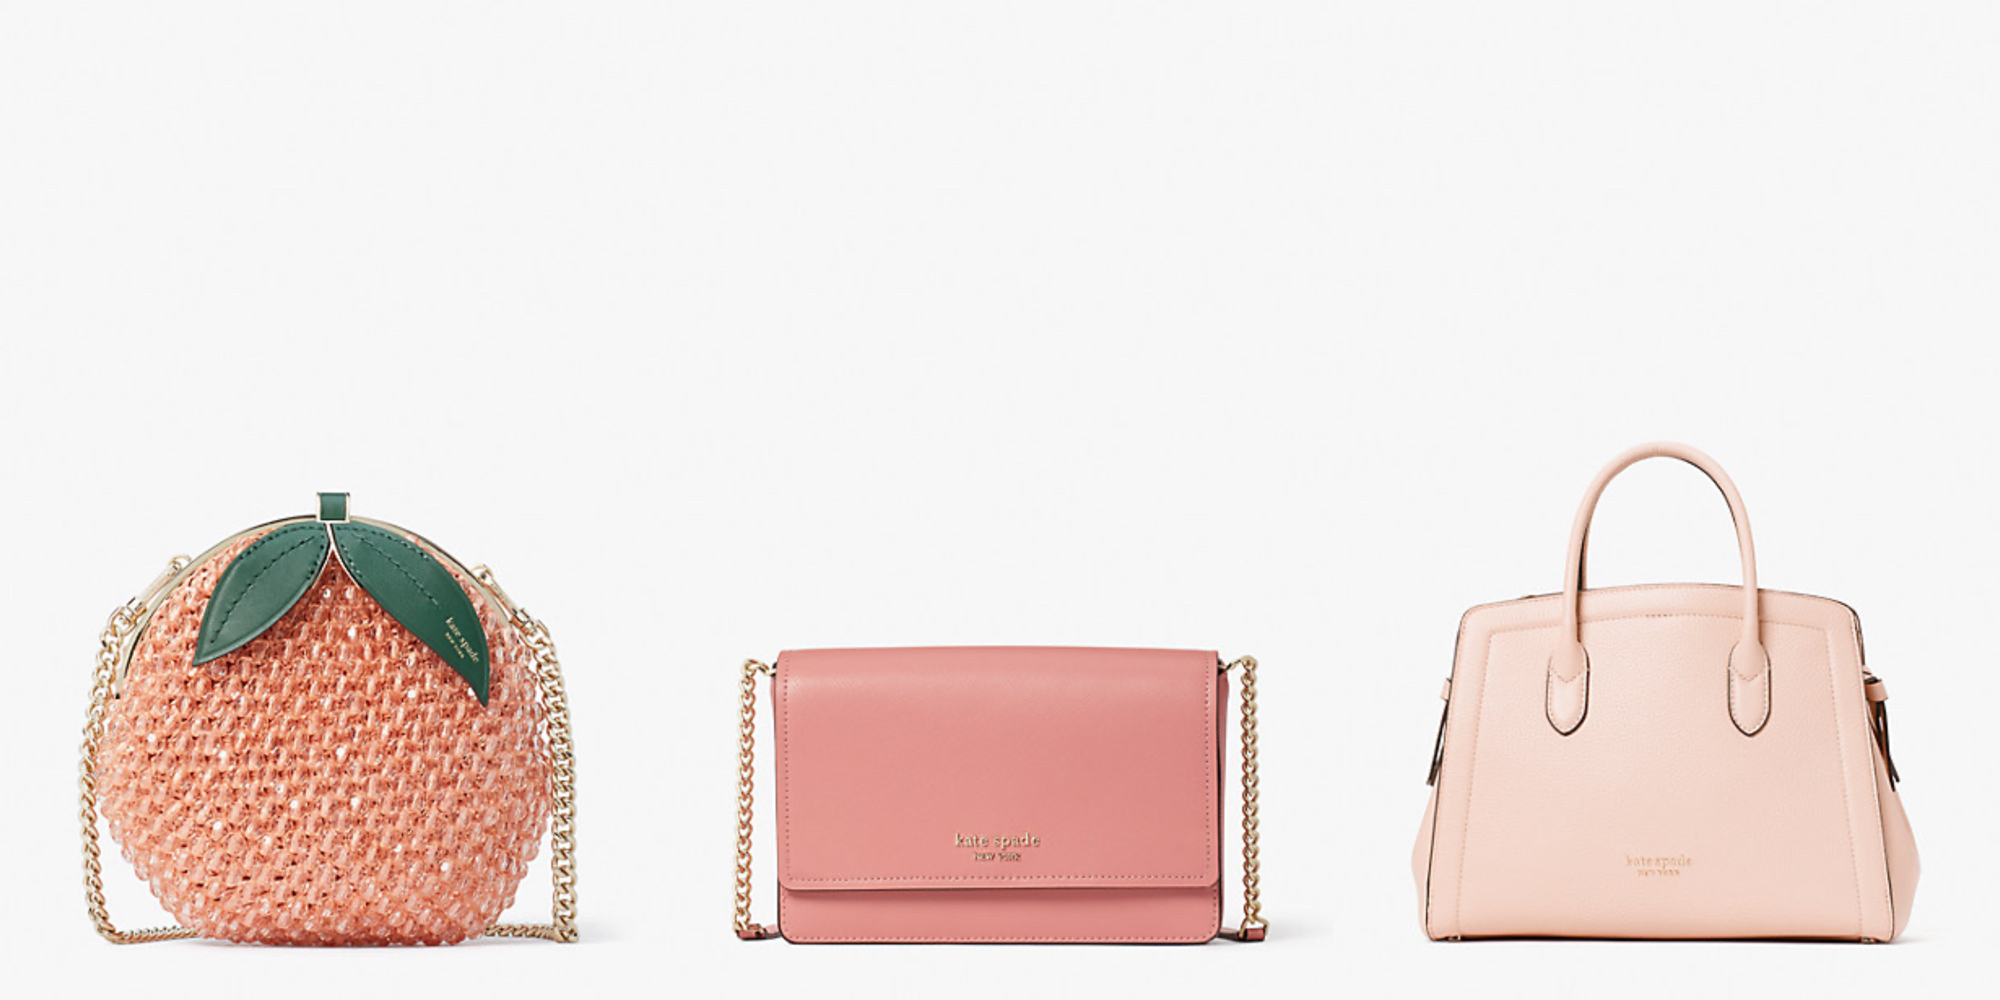 Kate Spade Sale: Get 30 percent off at checkout through July 24 with new  promo code 